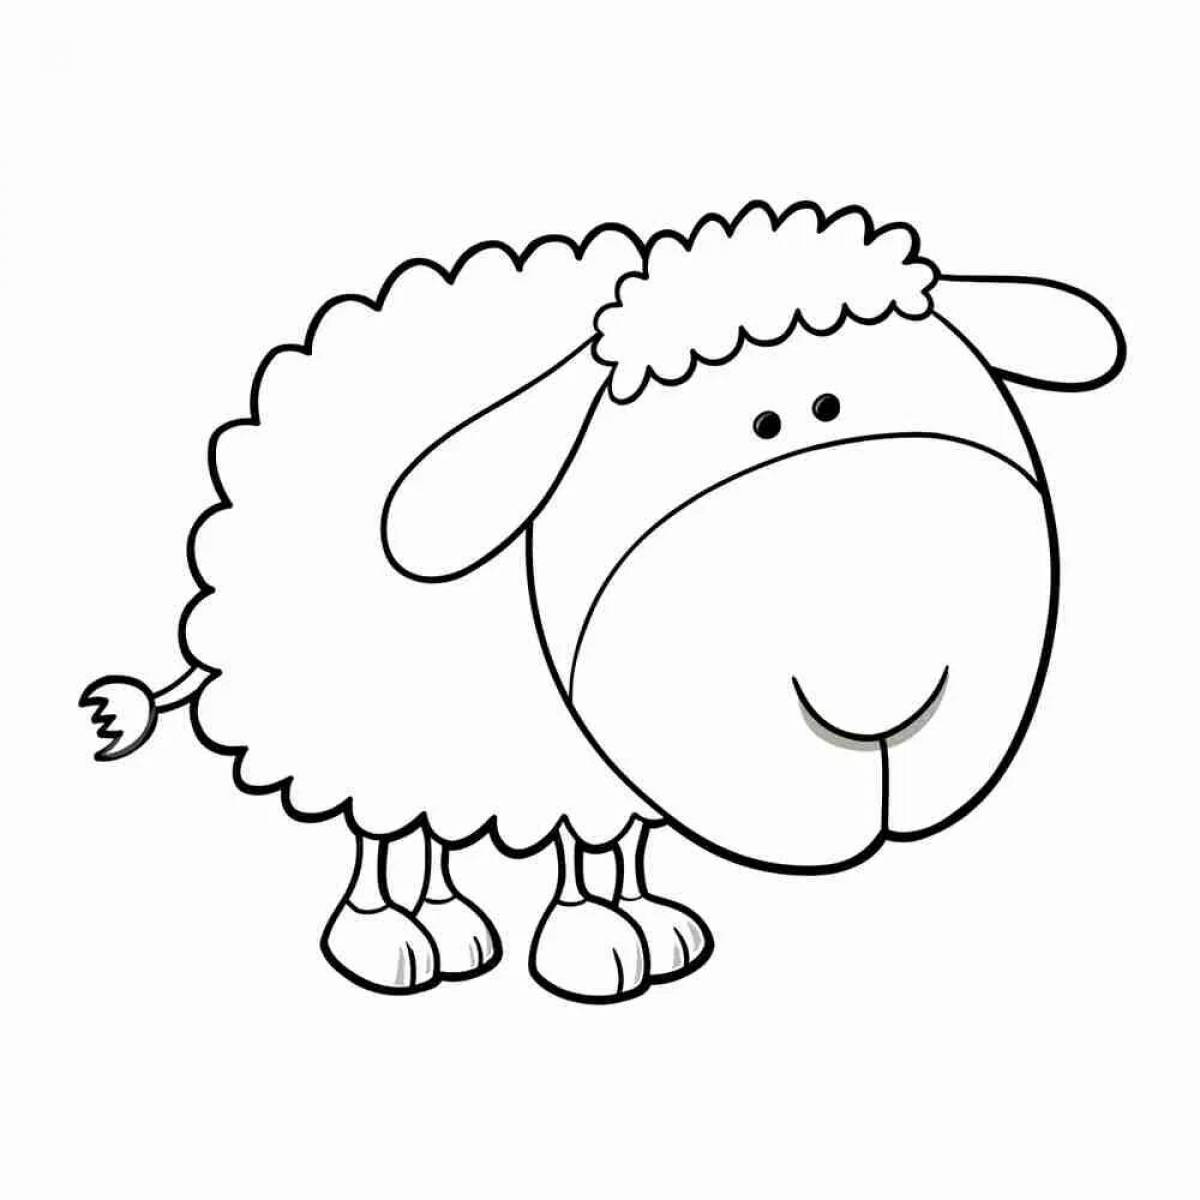 Cute sheep coloring book for kids 2-3 years old